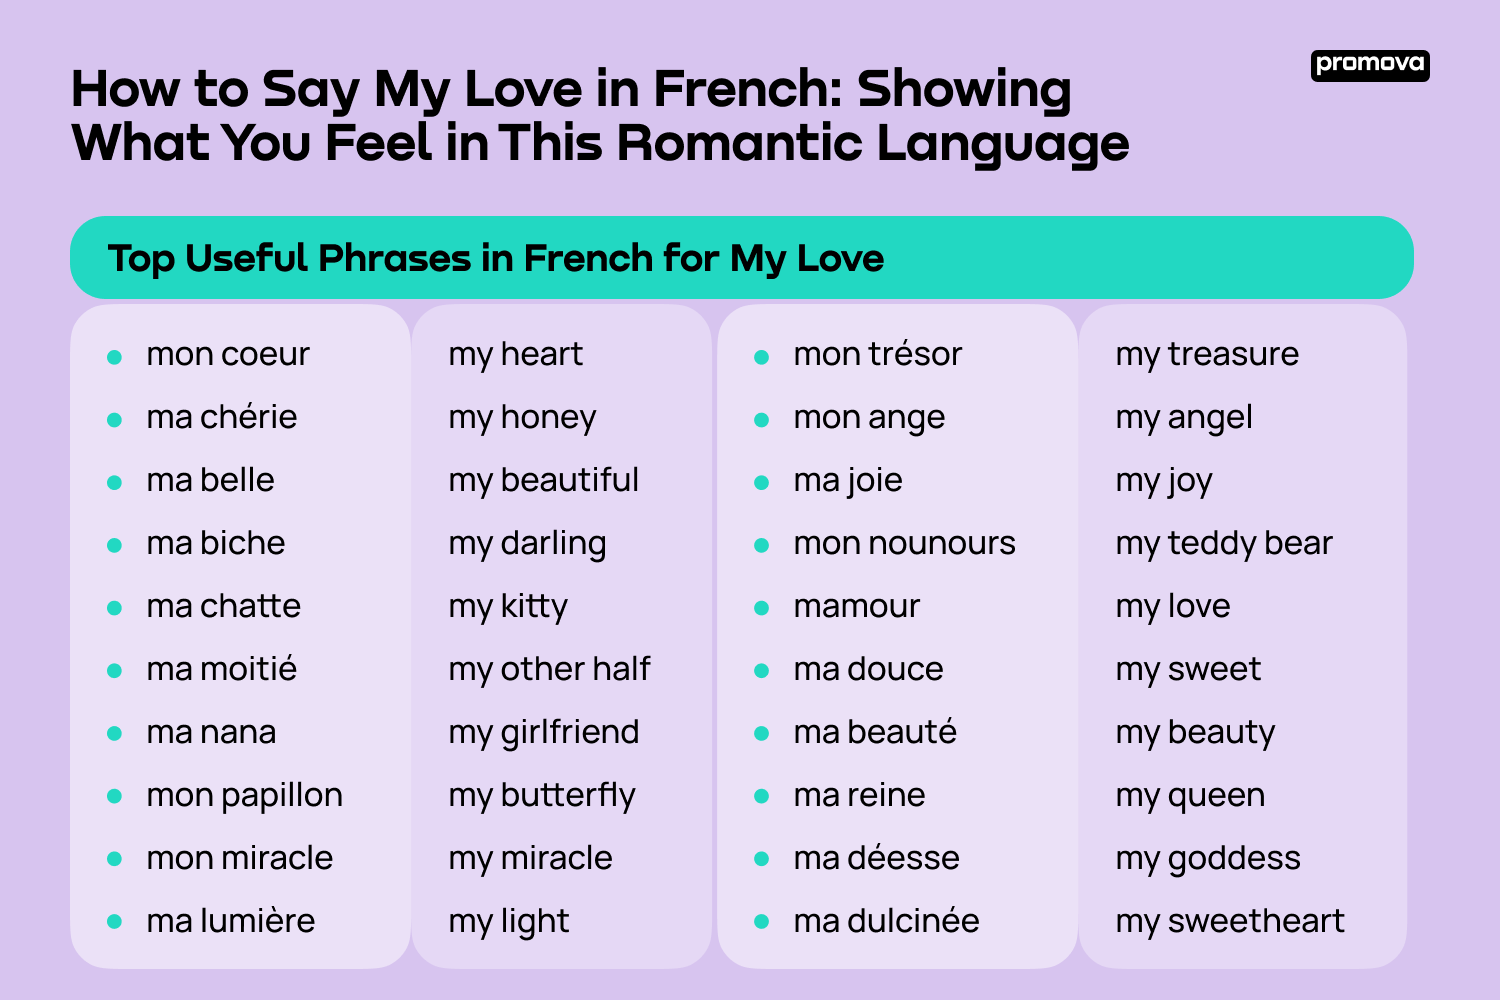 Discover Top Useful Phrases in French for My Love